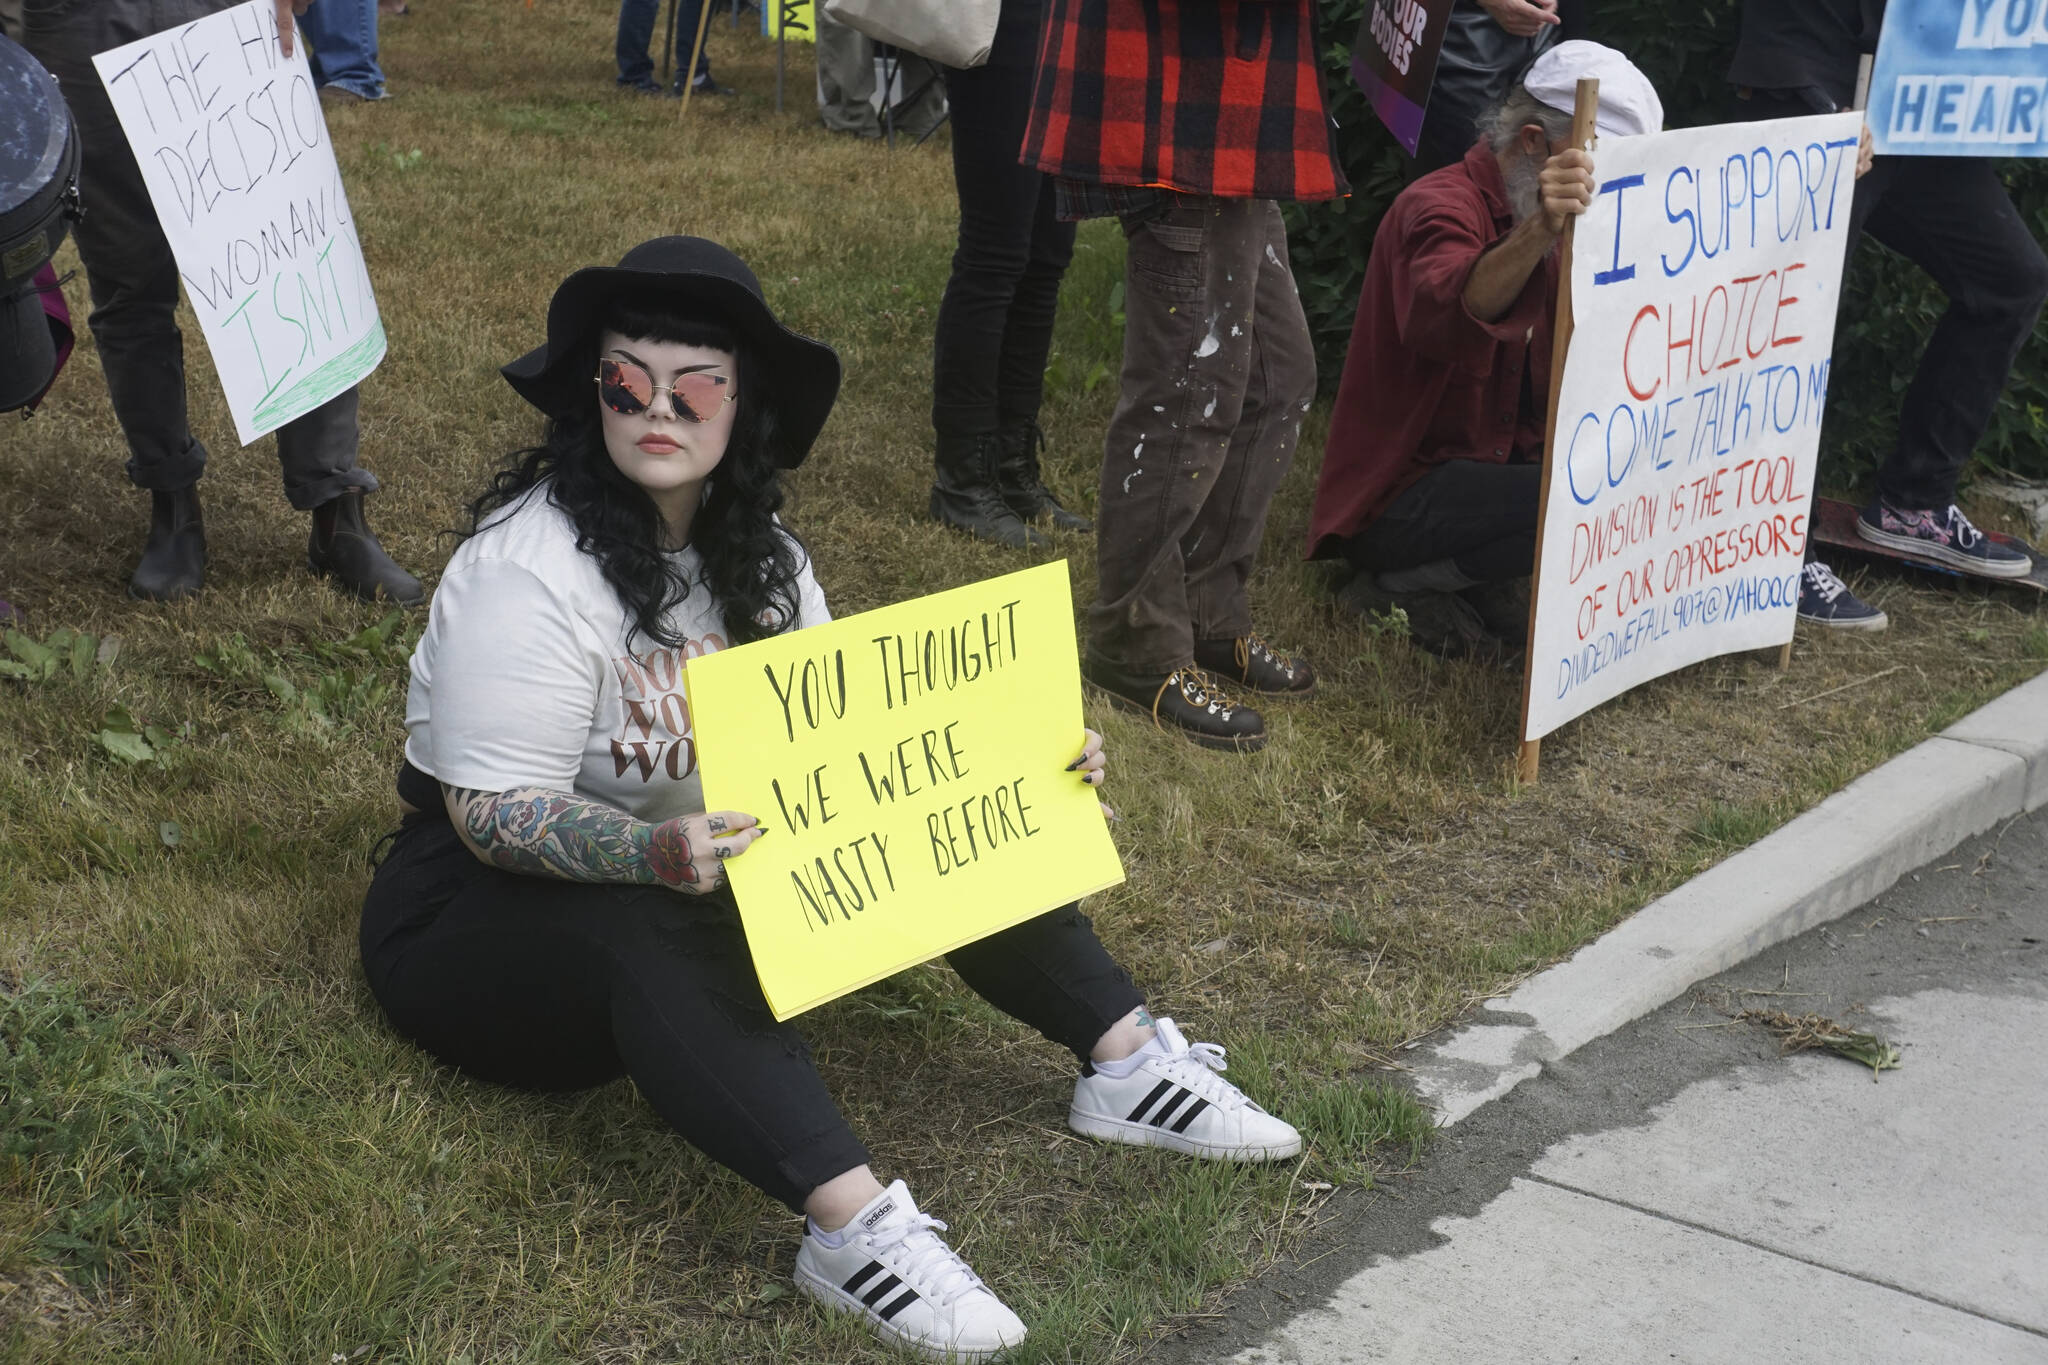 Salem Carrico-Roger holds a sign that reads "You thought we were nasty before" at the "Women's March: Bans Off Our Bodies" protest on Saturday, July 9, 2022, at WKFL Park in Homer, Alaska. (Photo by Michael Armstrong/Homer News)